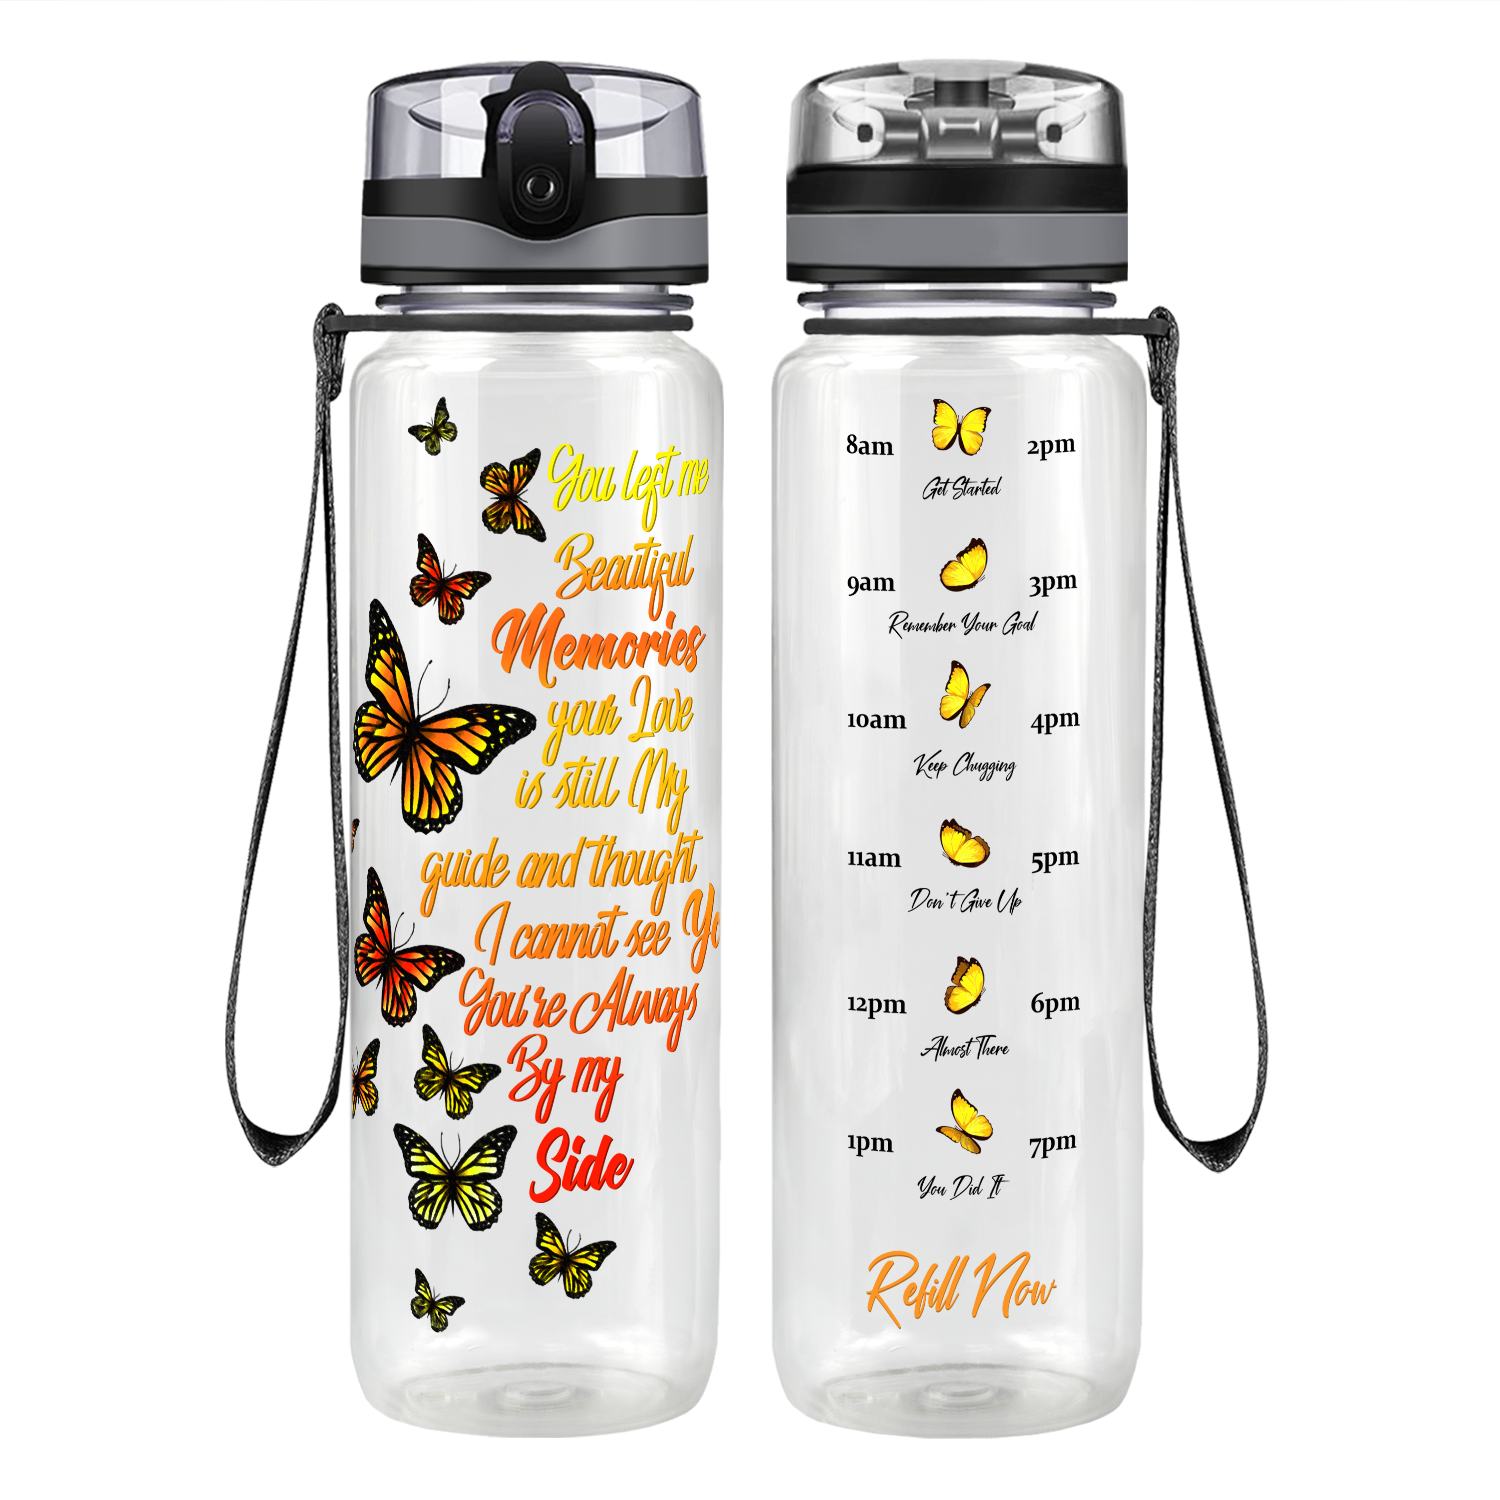 You Left Me Beautiful Memories on 32 oz Motivational Tracking Butterfly Water Bottle